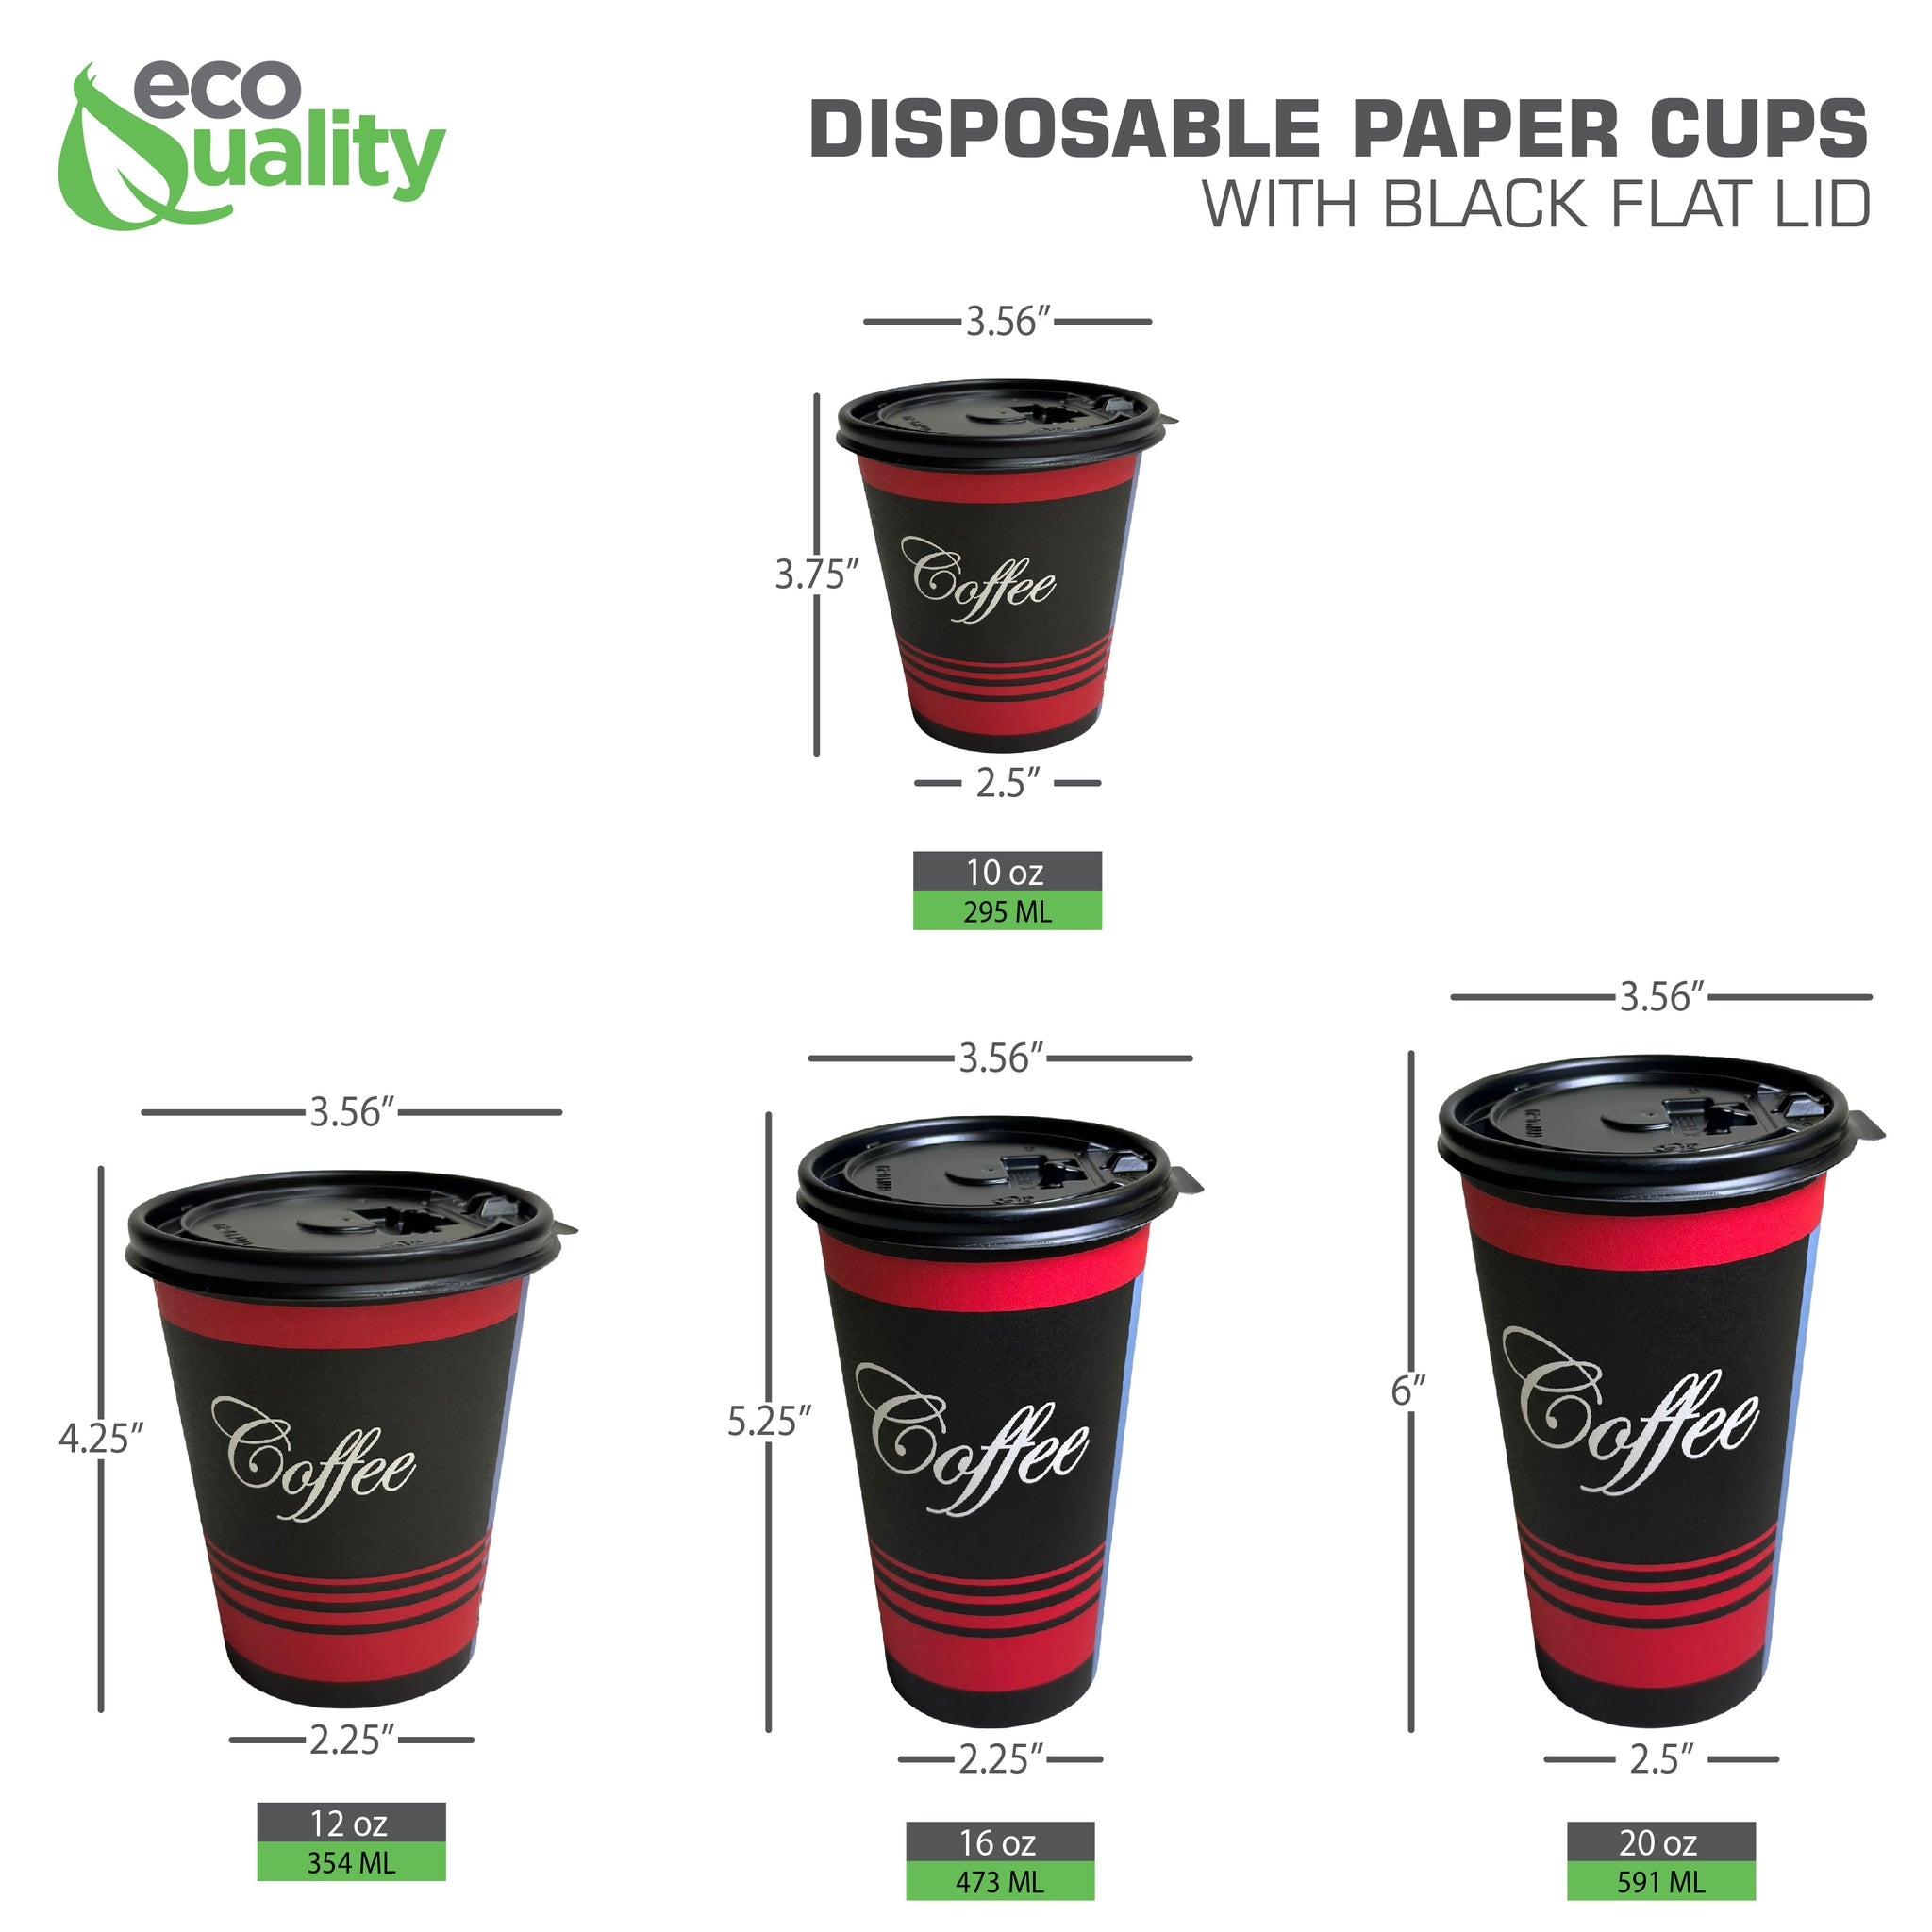 16oz Design Disposable Paper Coffee Cups with Black Flat Lids